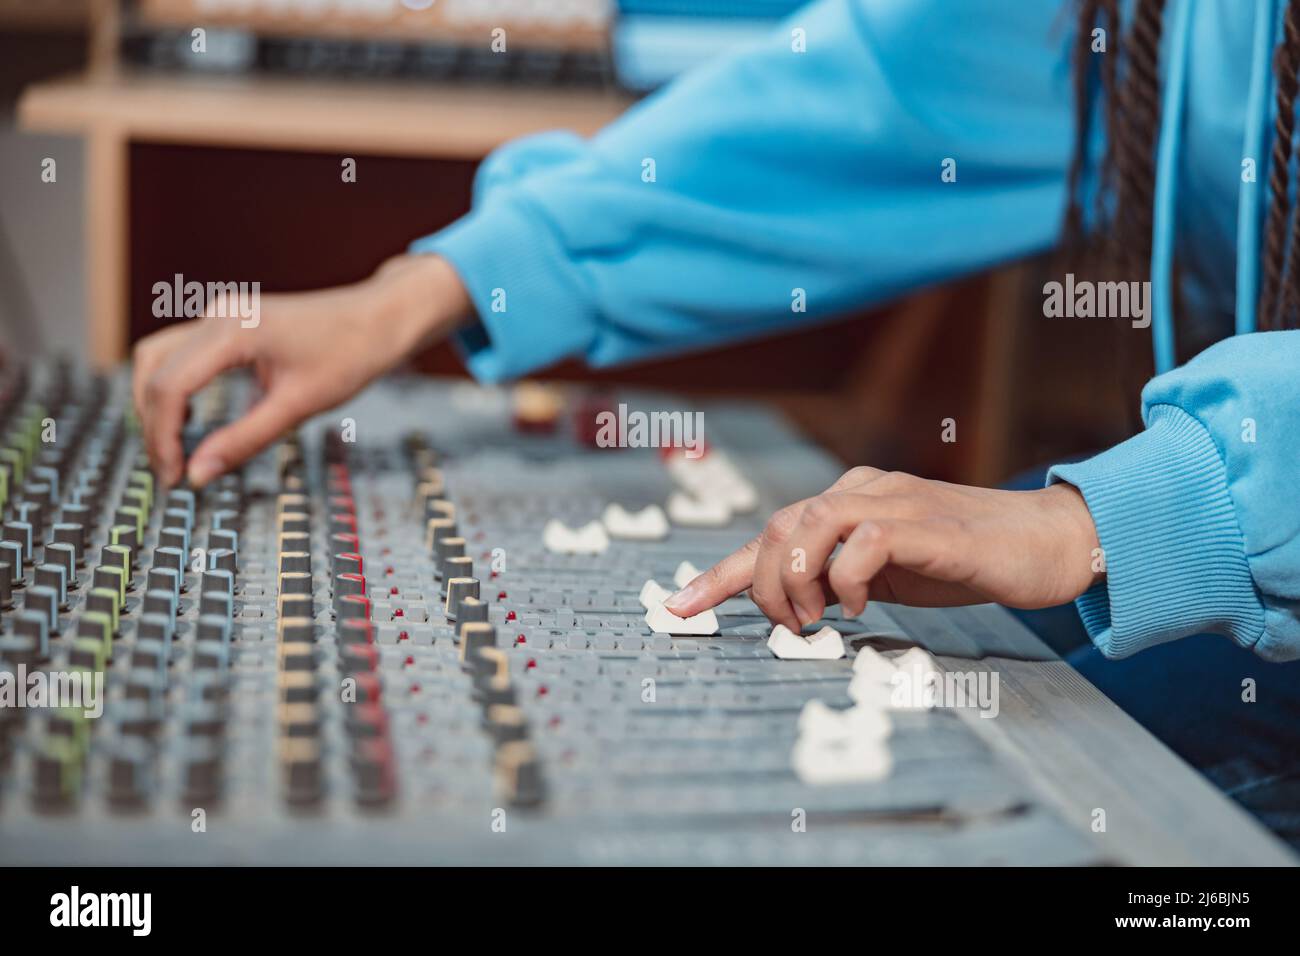 Female sound engineer, musician producer hands using mixing board and software to create song in recording studio Stock Photo